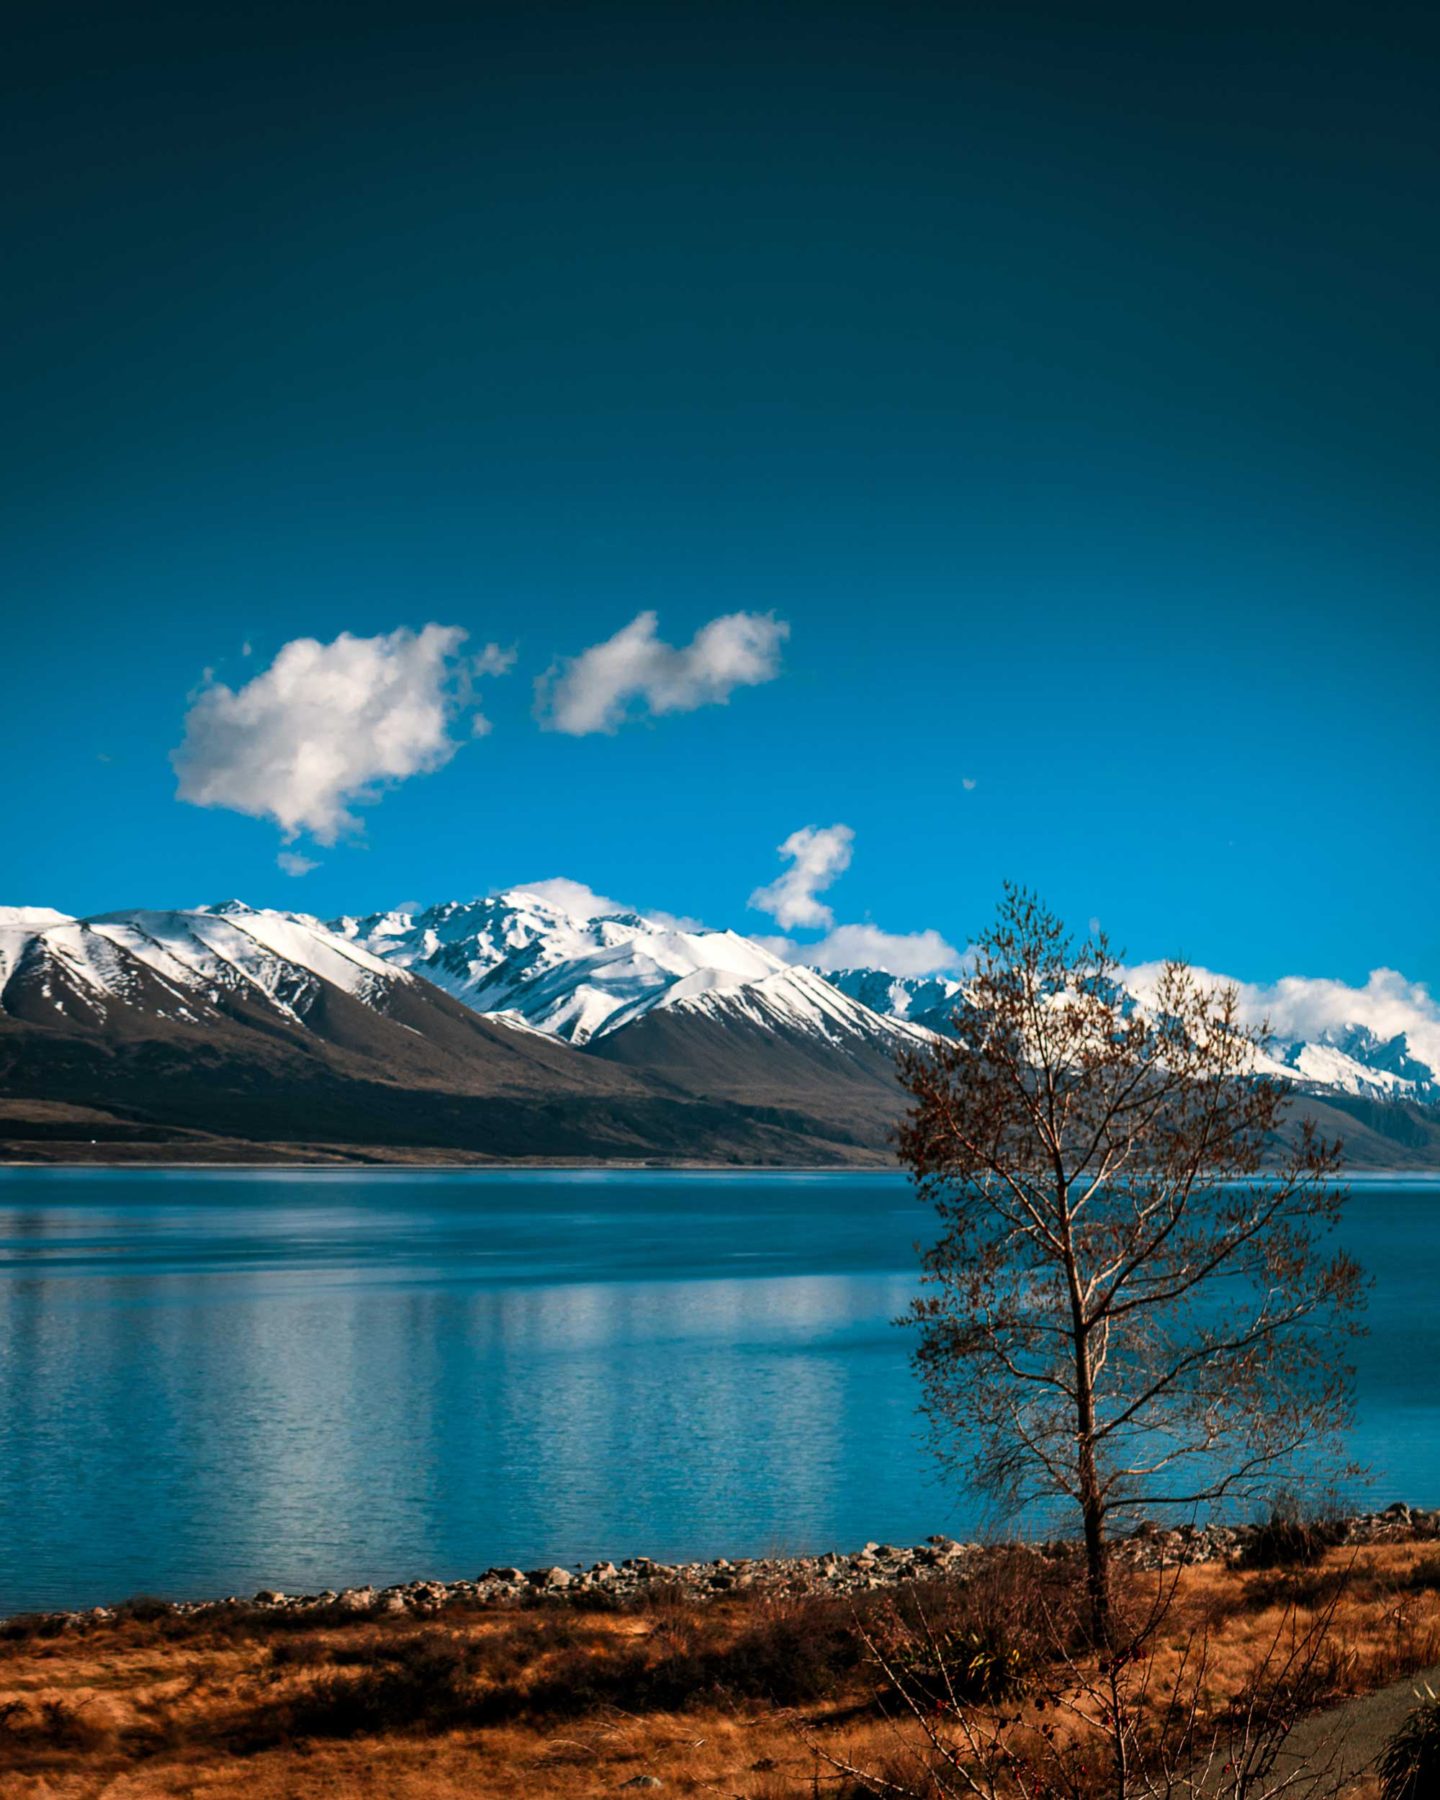 View across a blue lake to a snow-capped mountain range in the distance, South Island, NewZealand